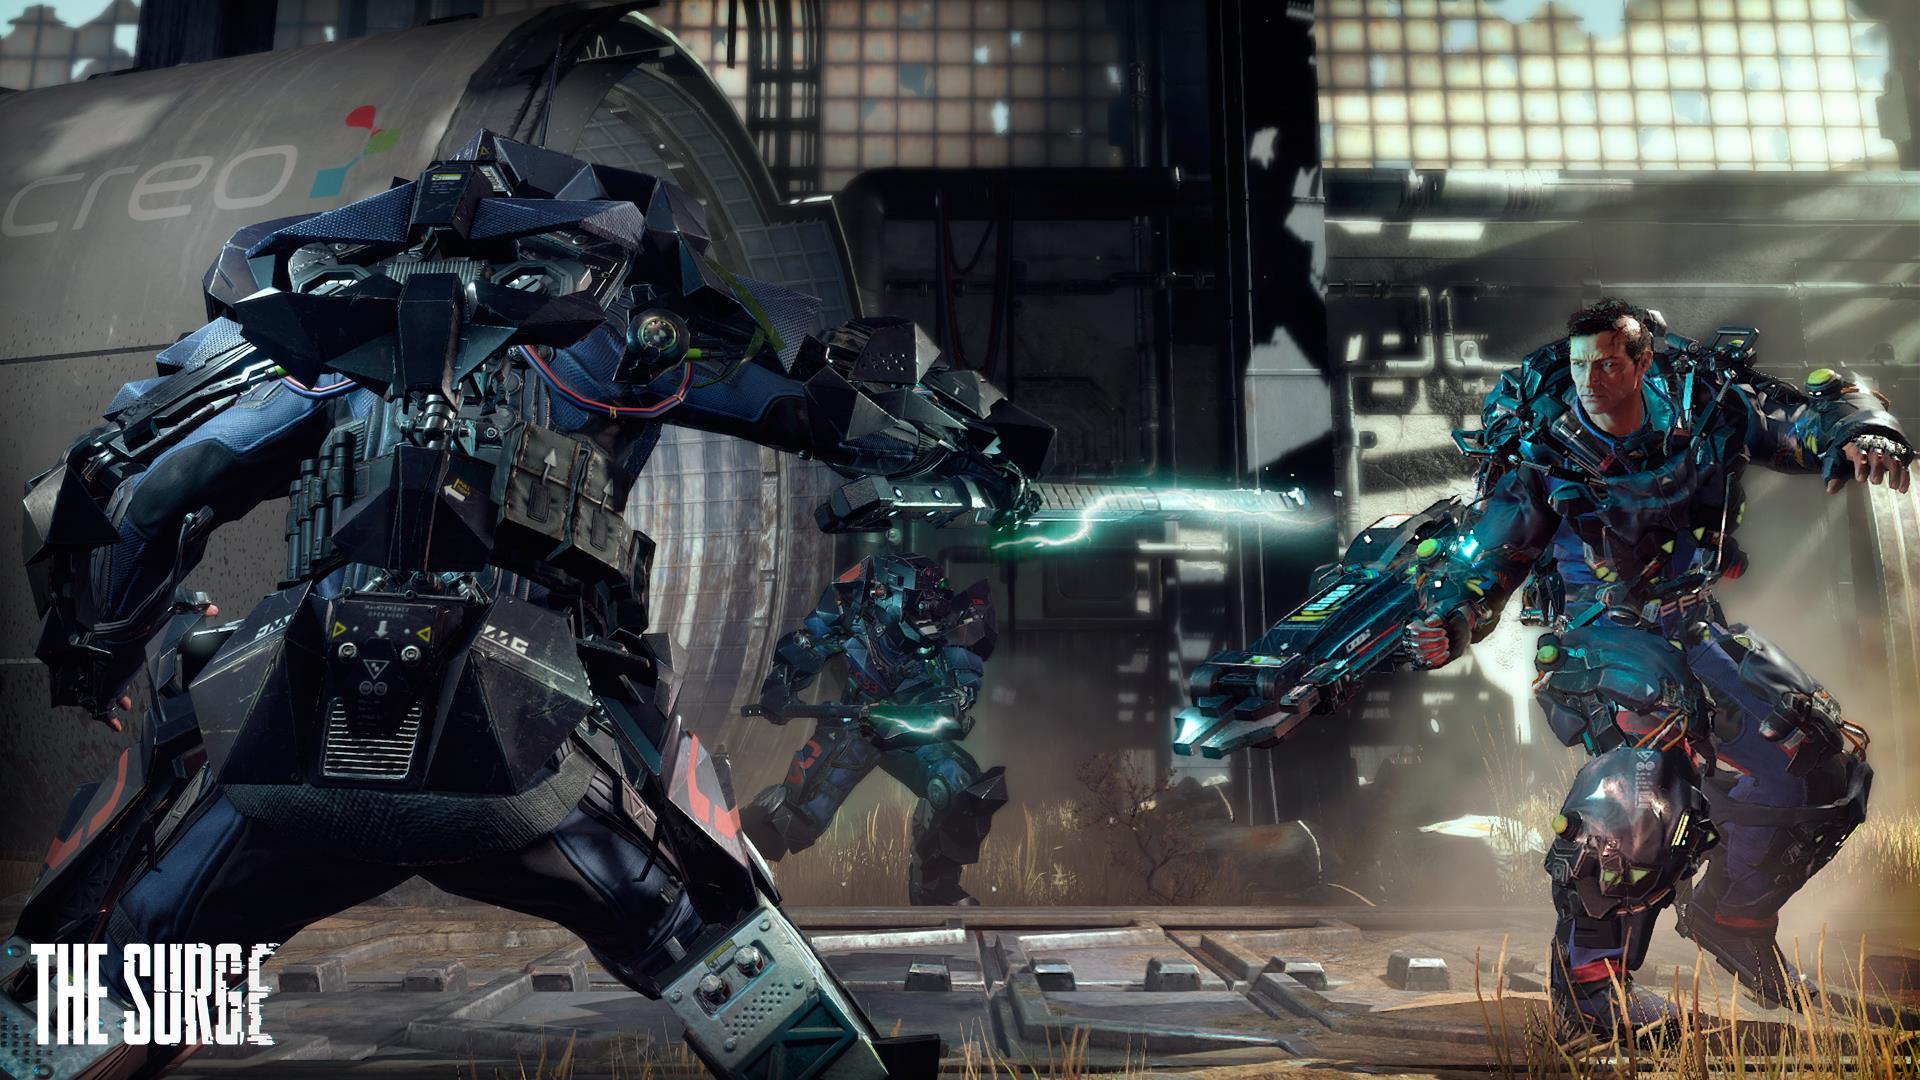 Image for The Surge in-game screenshots show off enemies big and small